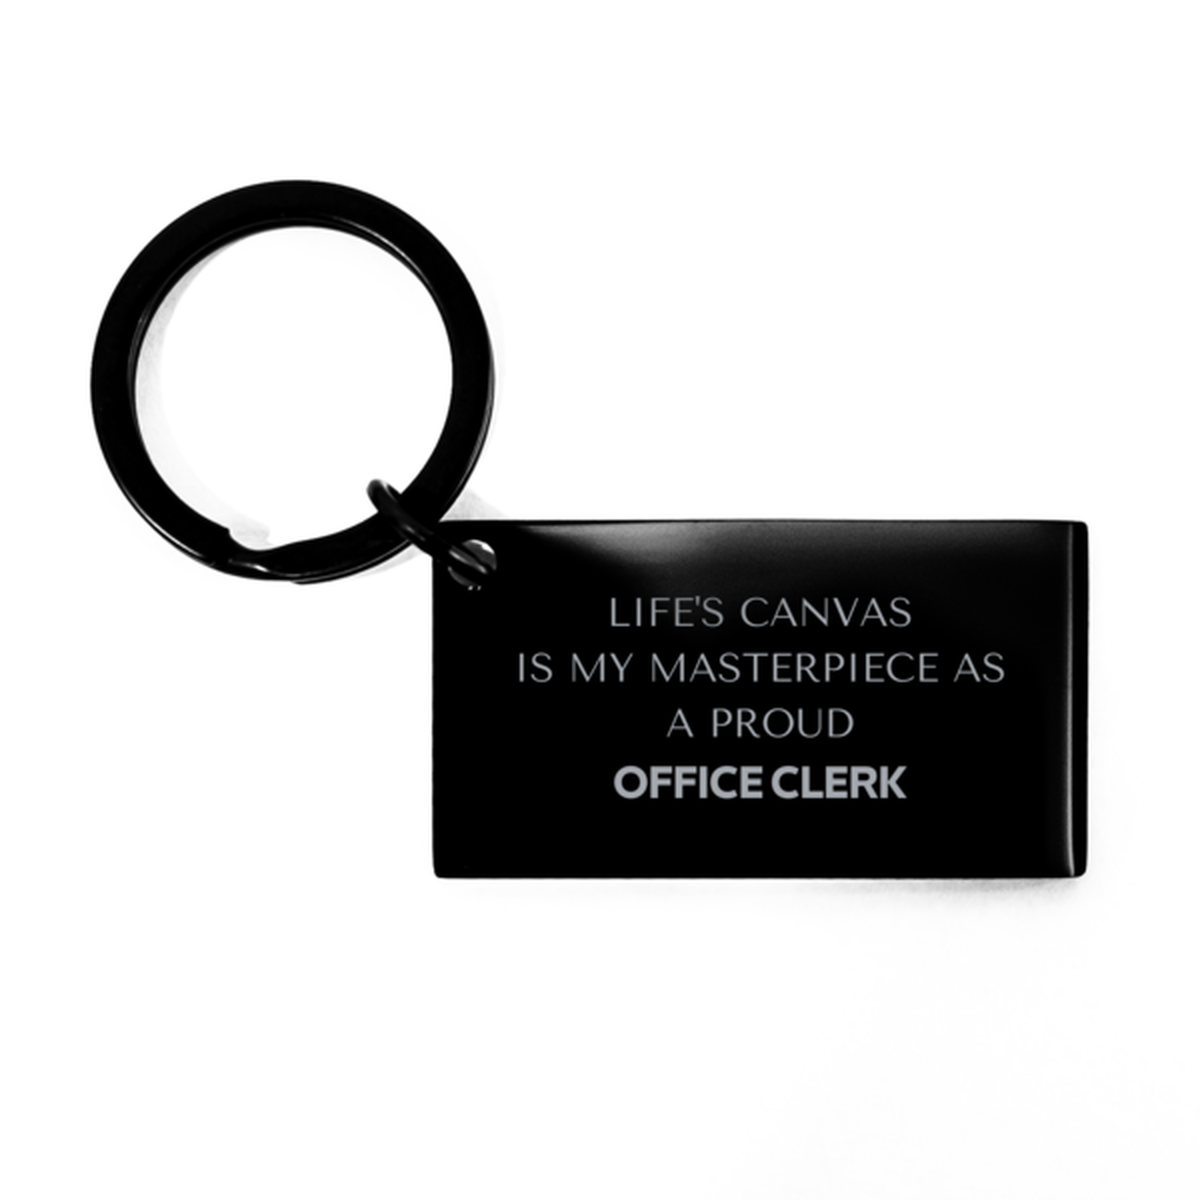 Proud Office Clerk Gifts, Life's canvas is my masterpiece, Epic Birthday Christmas Unique Keychain For Office Clerk, Coworkers, Men, Women, Friends